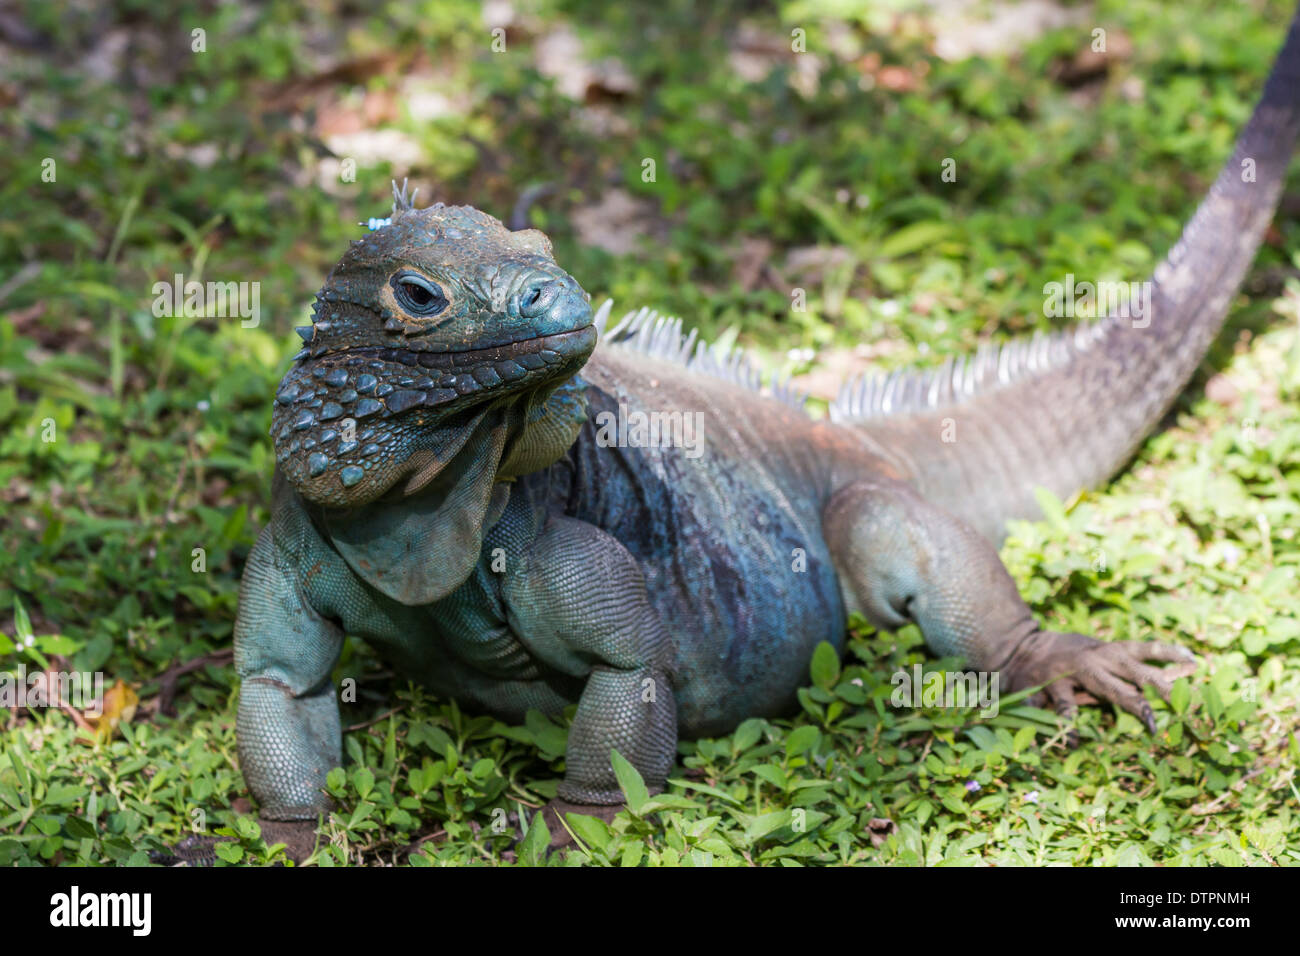 An endangered male blue iguana in the grass at Queen Elizabeth II Botanic Park on Grand Cayman, Cayman Islands Stock Photo